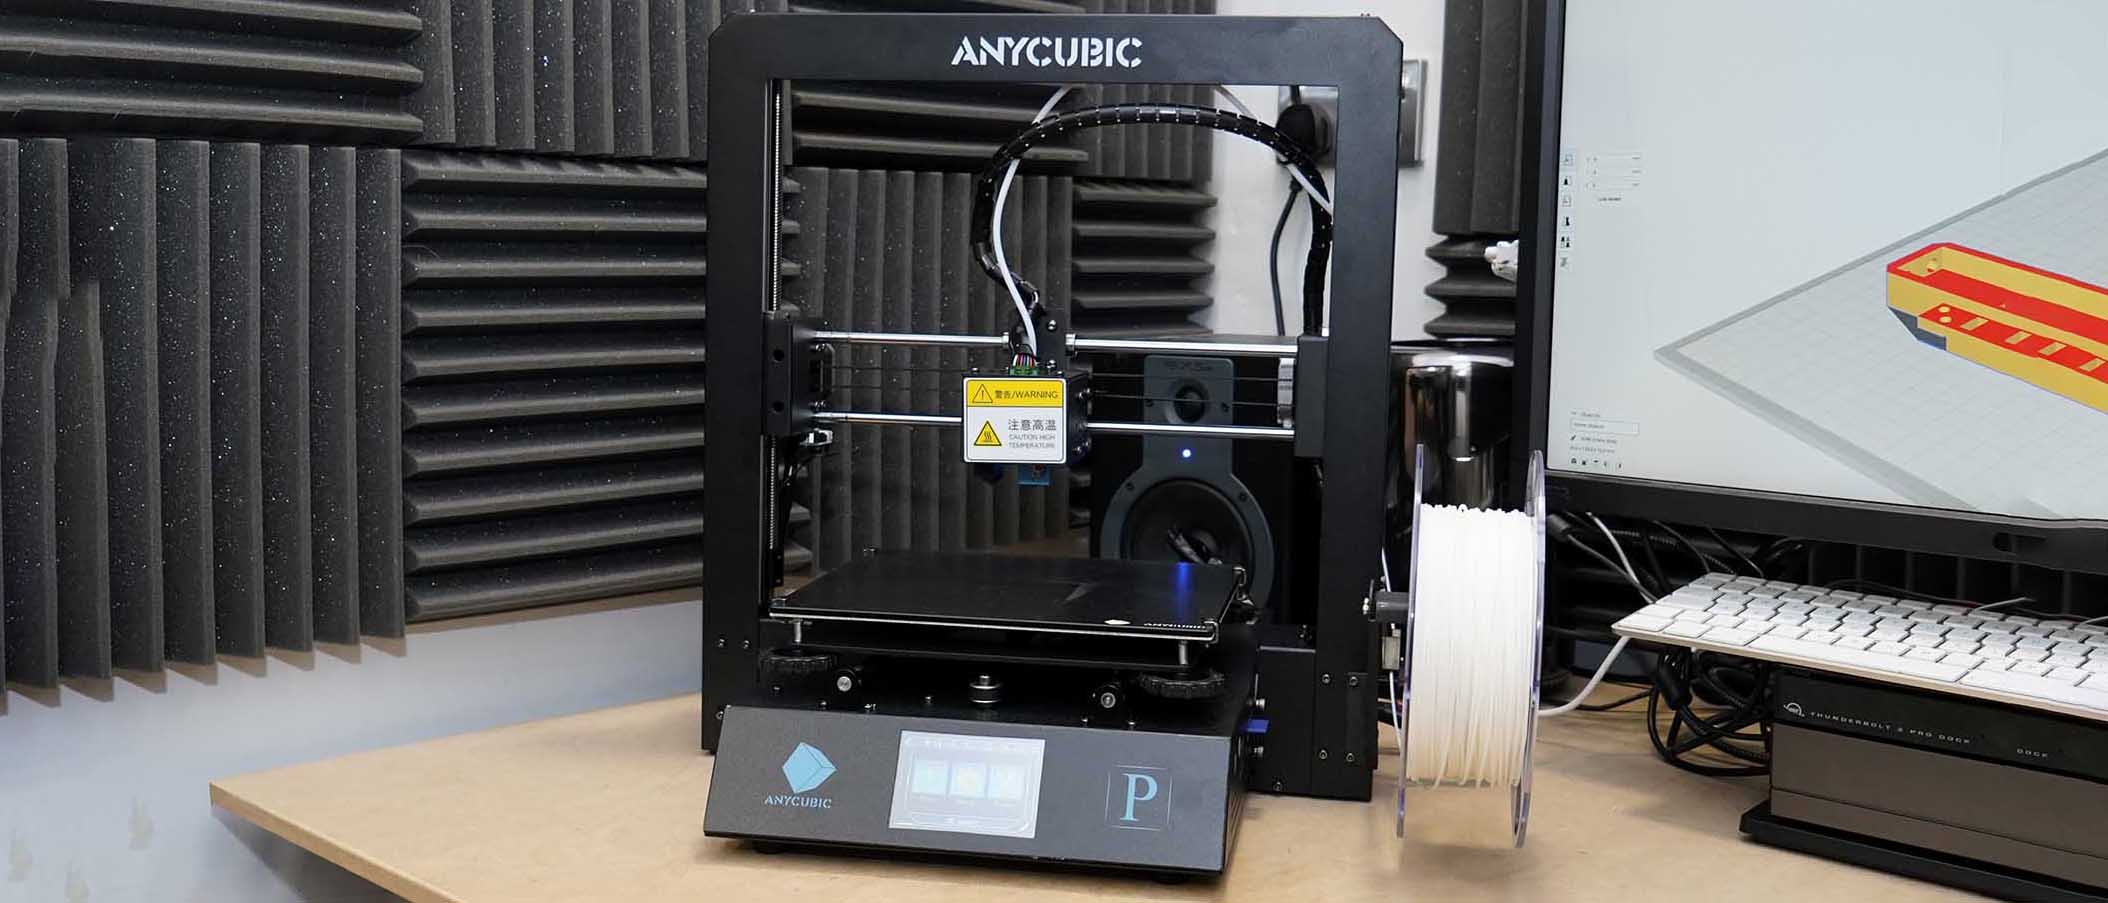 AnyCubic Mega Pro review